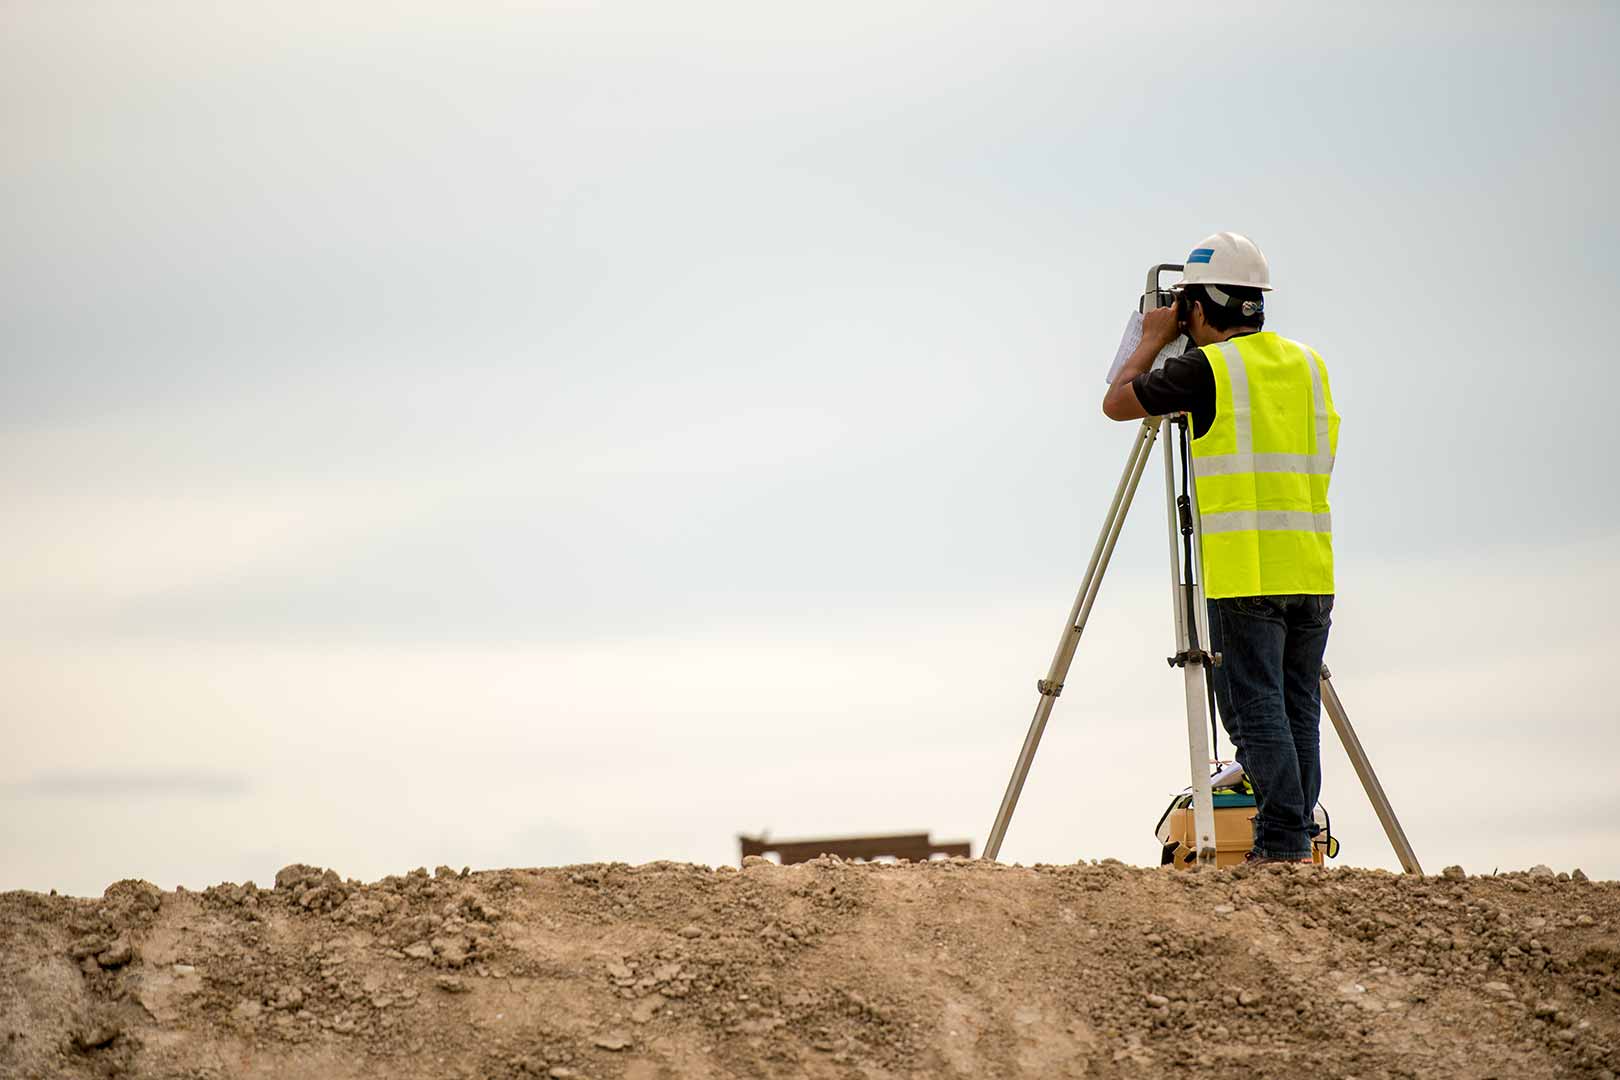 Land surveying services from Scott Engineering in Watertown, SD